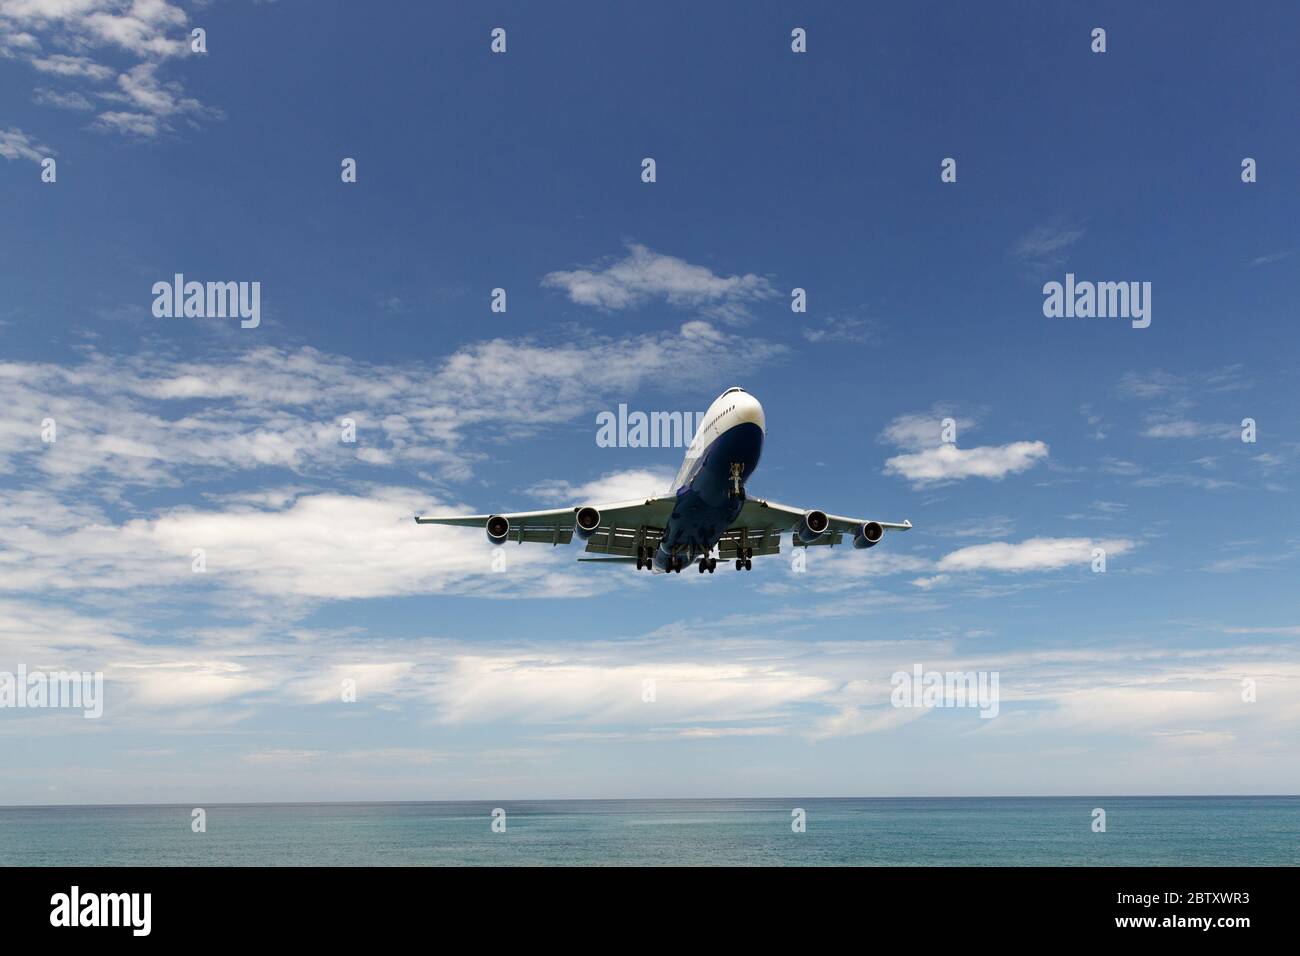 Vacation, travel, aviation concept. Modern commercial airplane jetliner flying in blue sky above the sea, copy space. Bottom view. Stock Photo